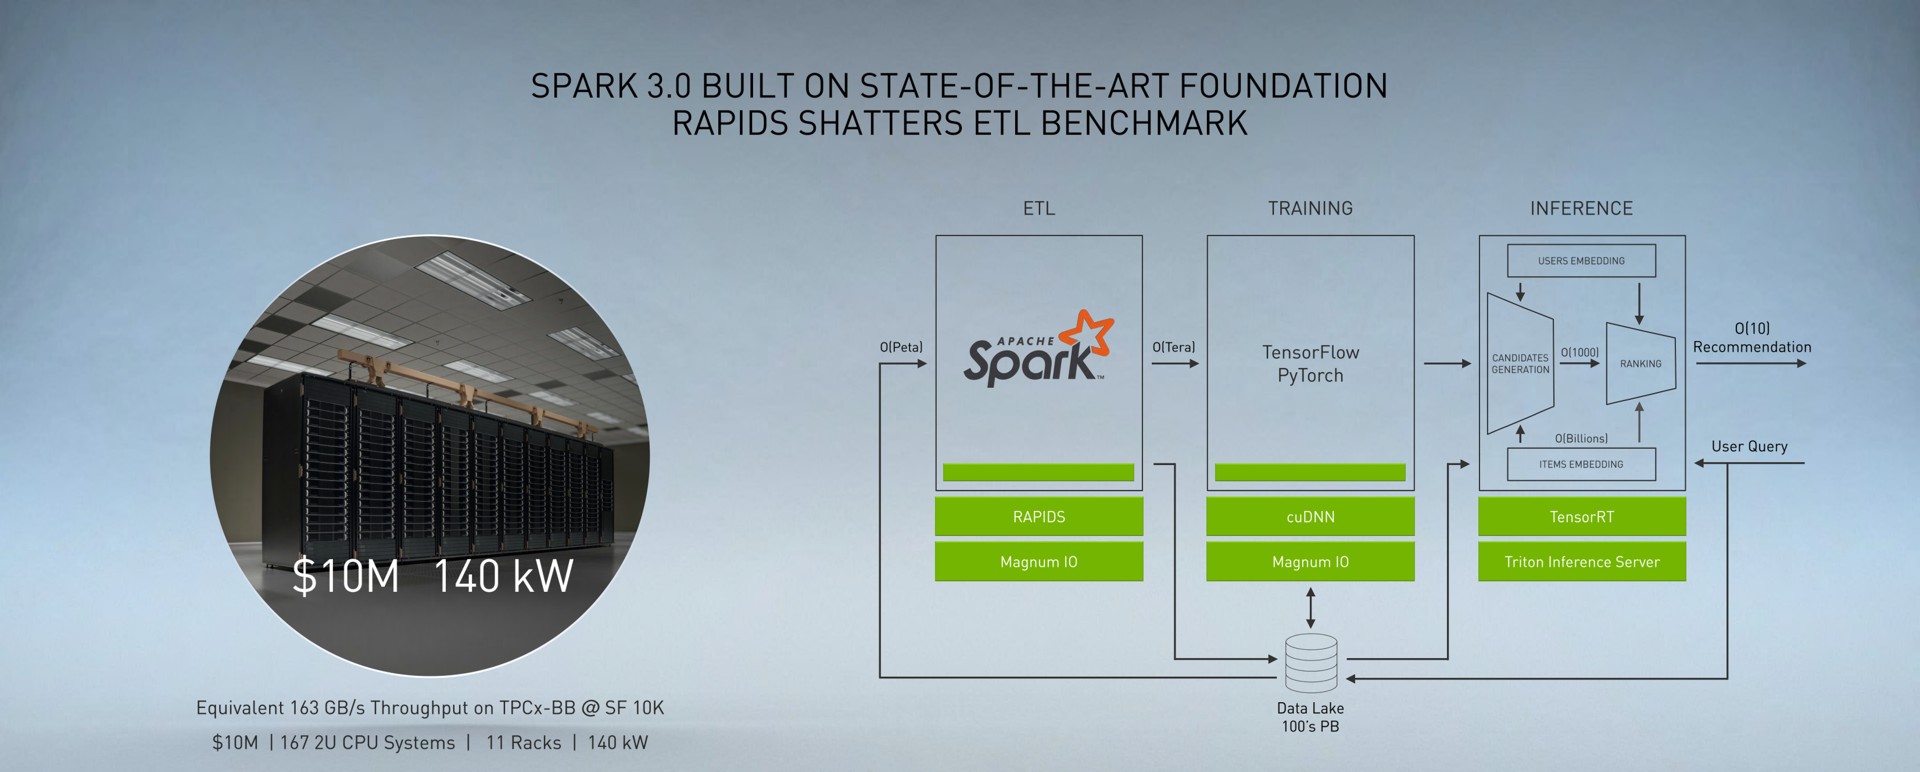 spark built on state of the art foundation rapids shatters canons | NVIDIA